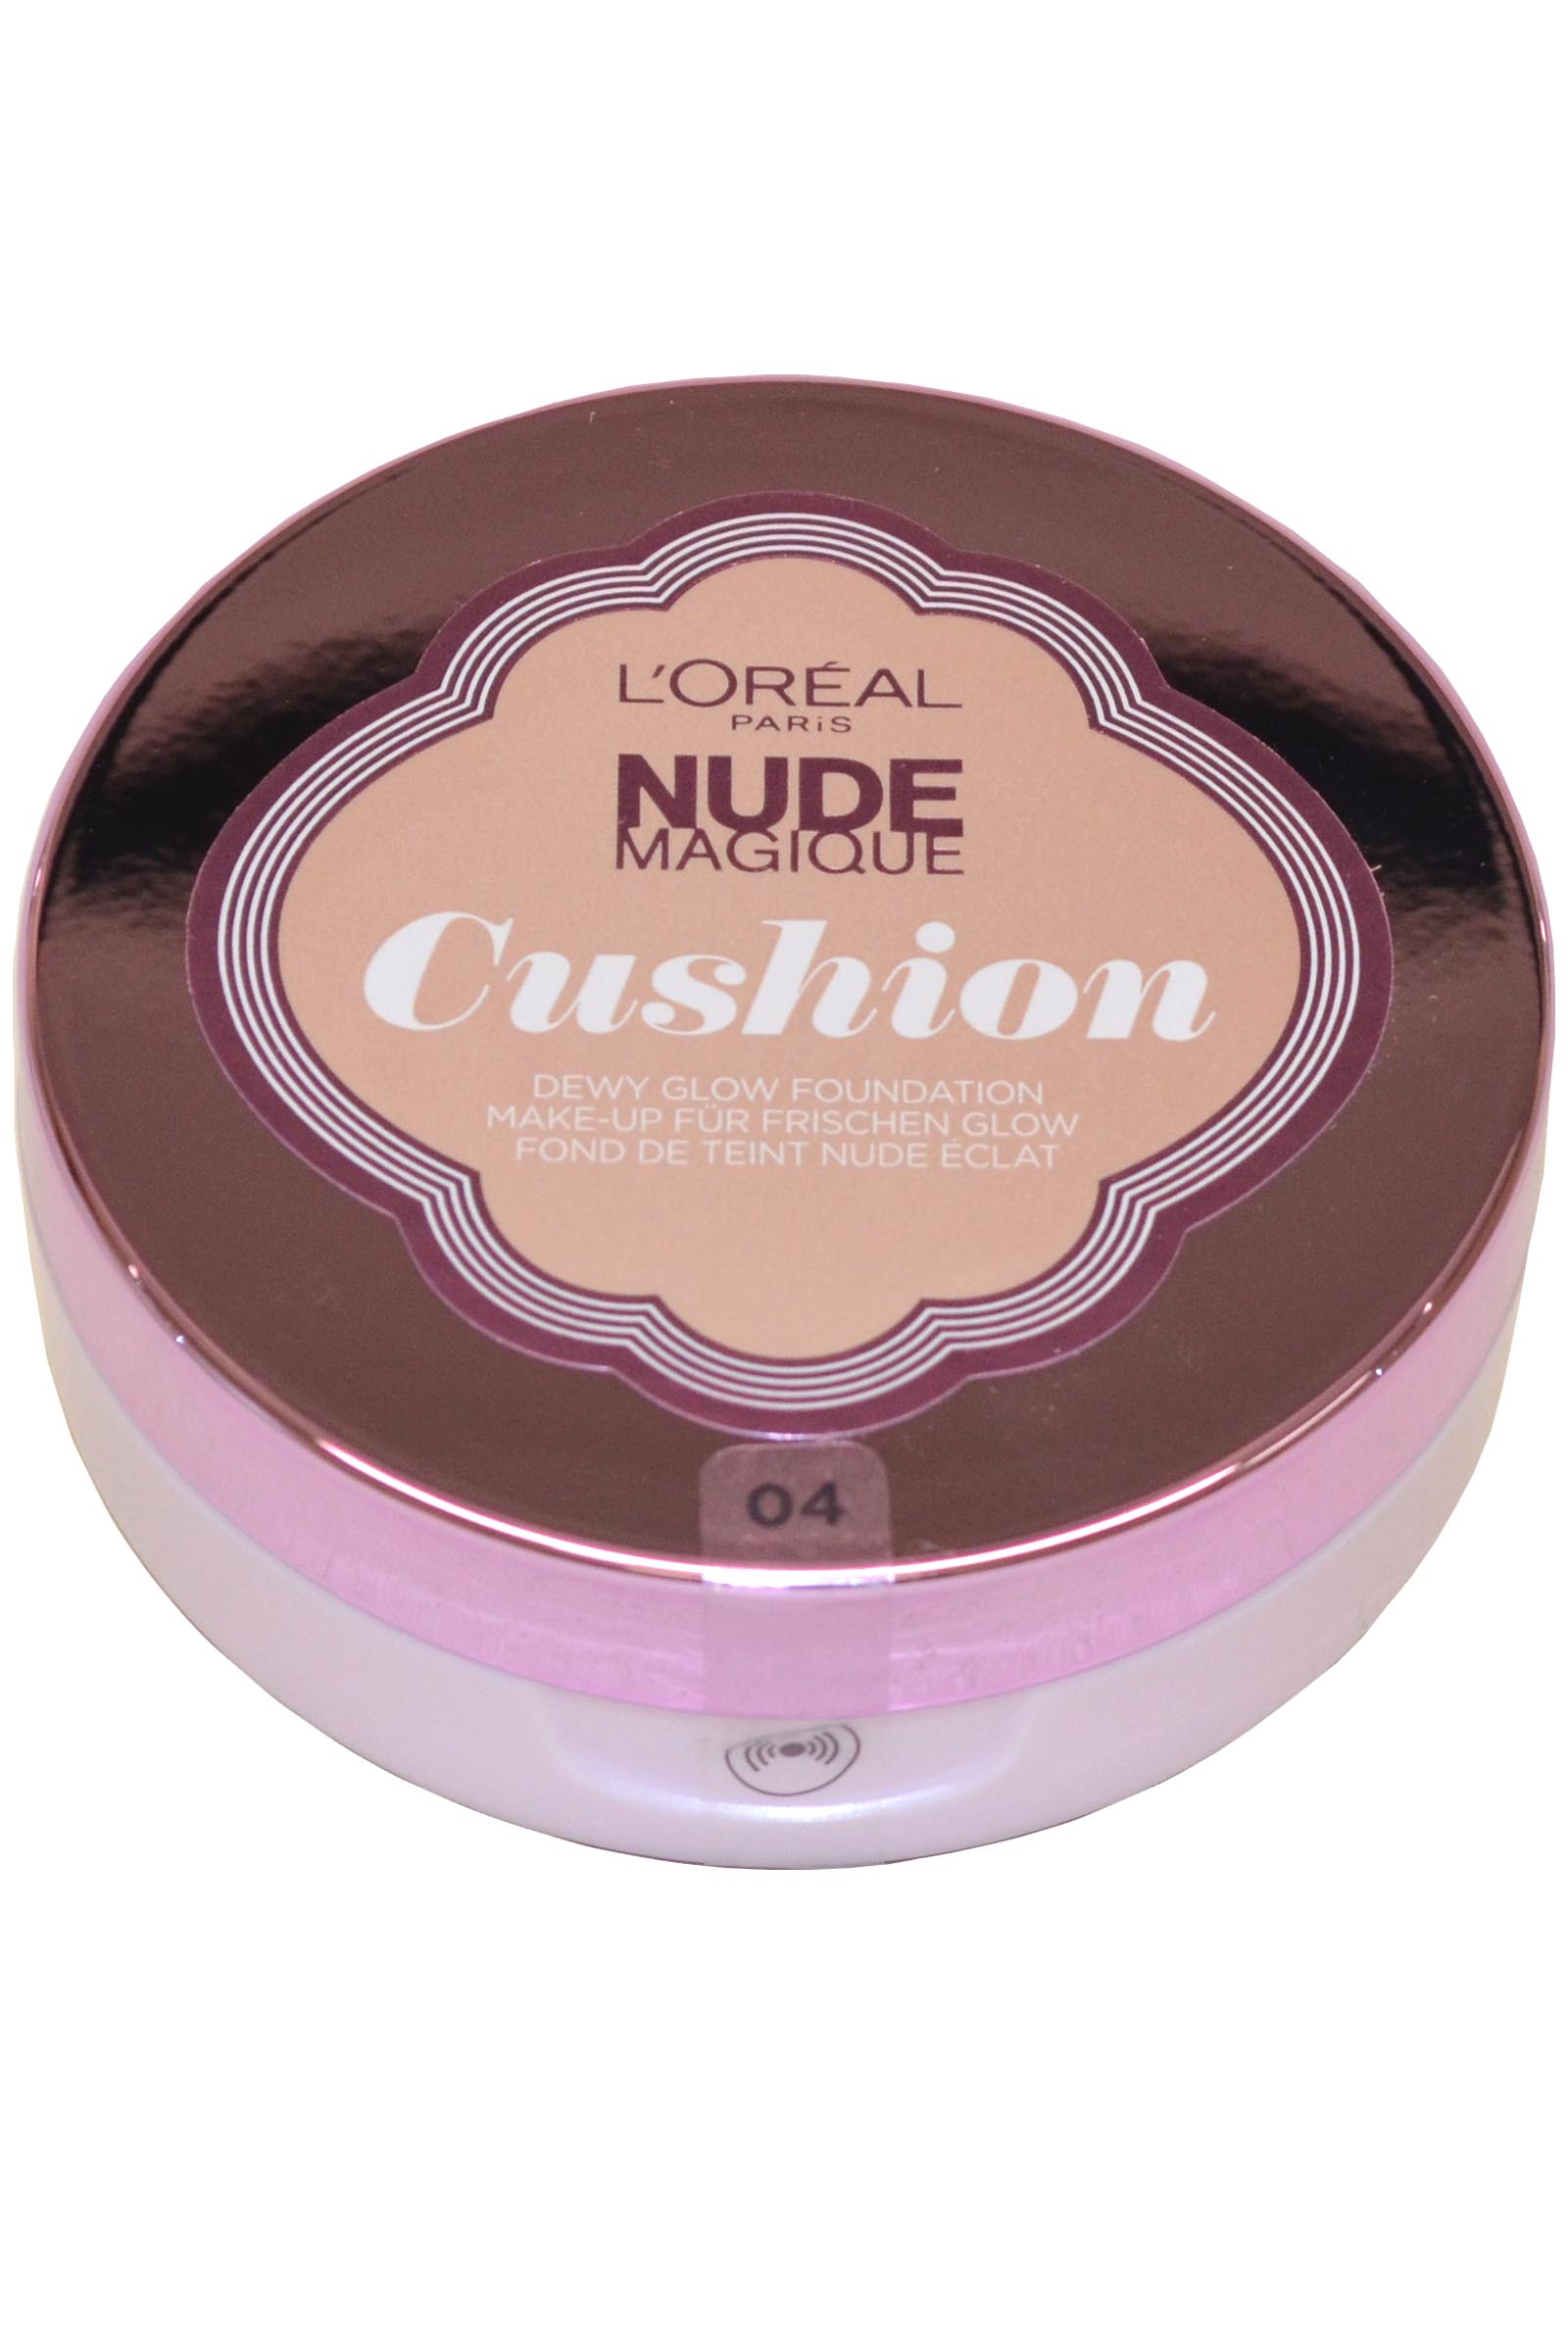 Review - LOreal Nude Magique Cushion Foundation 